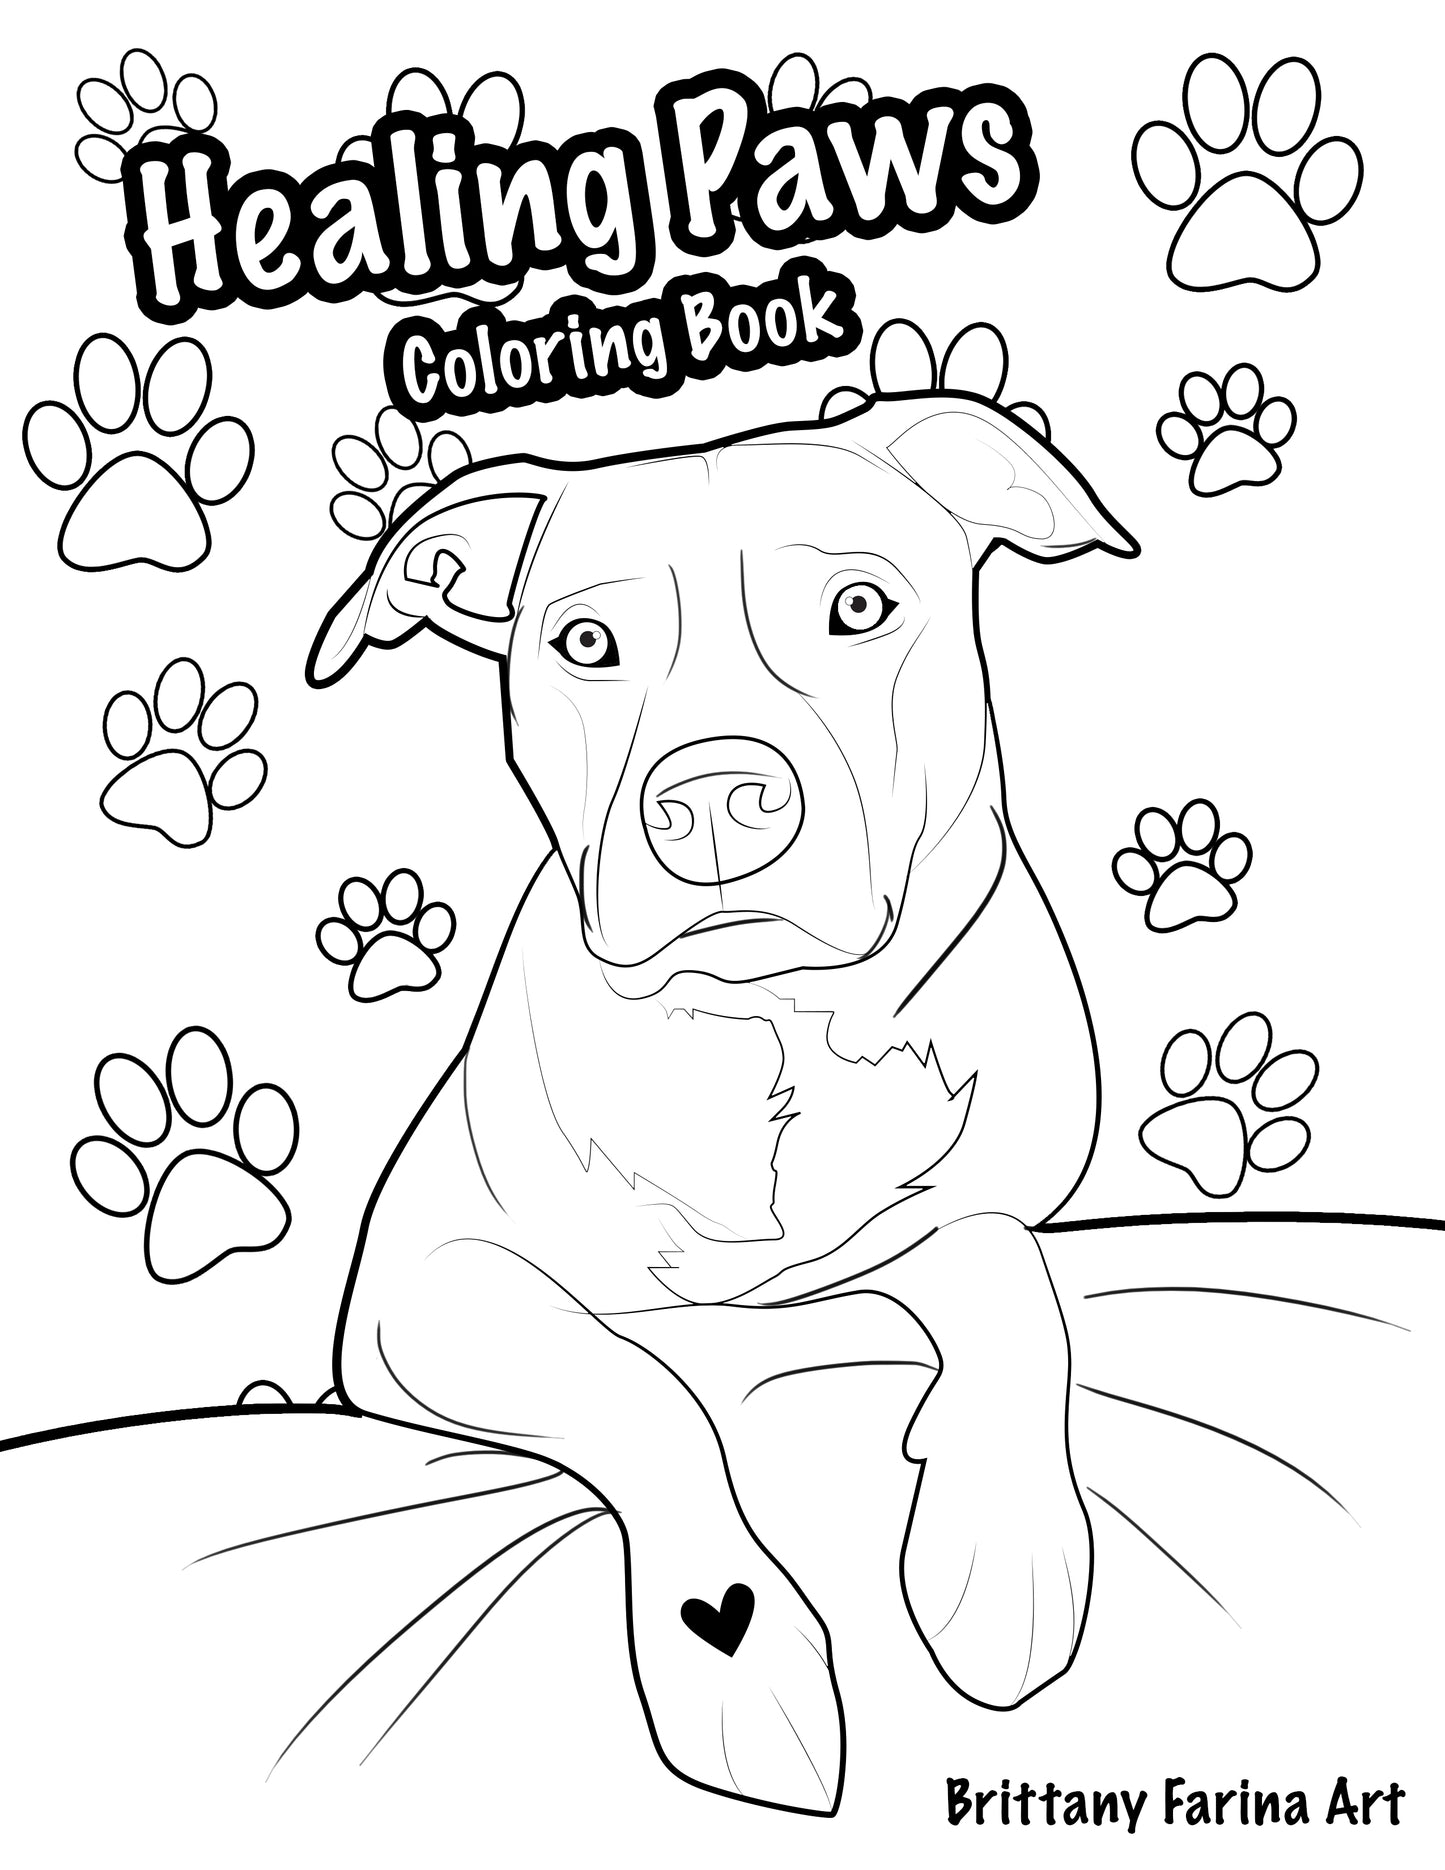 Healing Paws Coloring Book